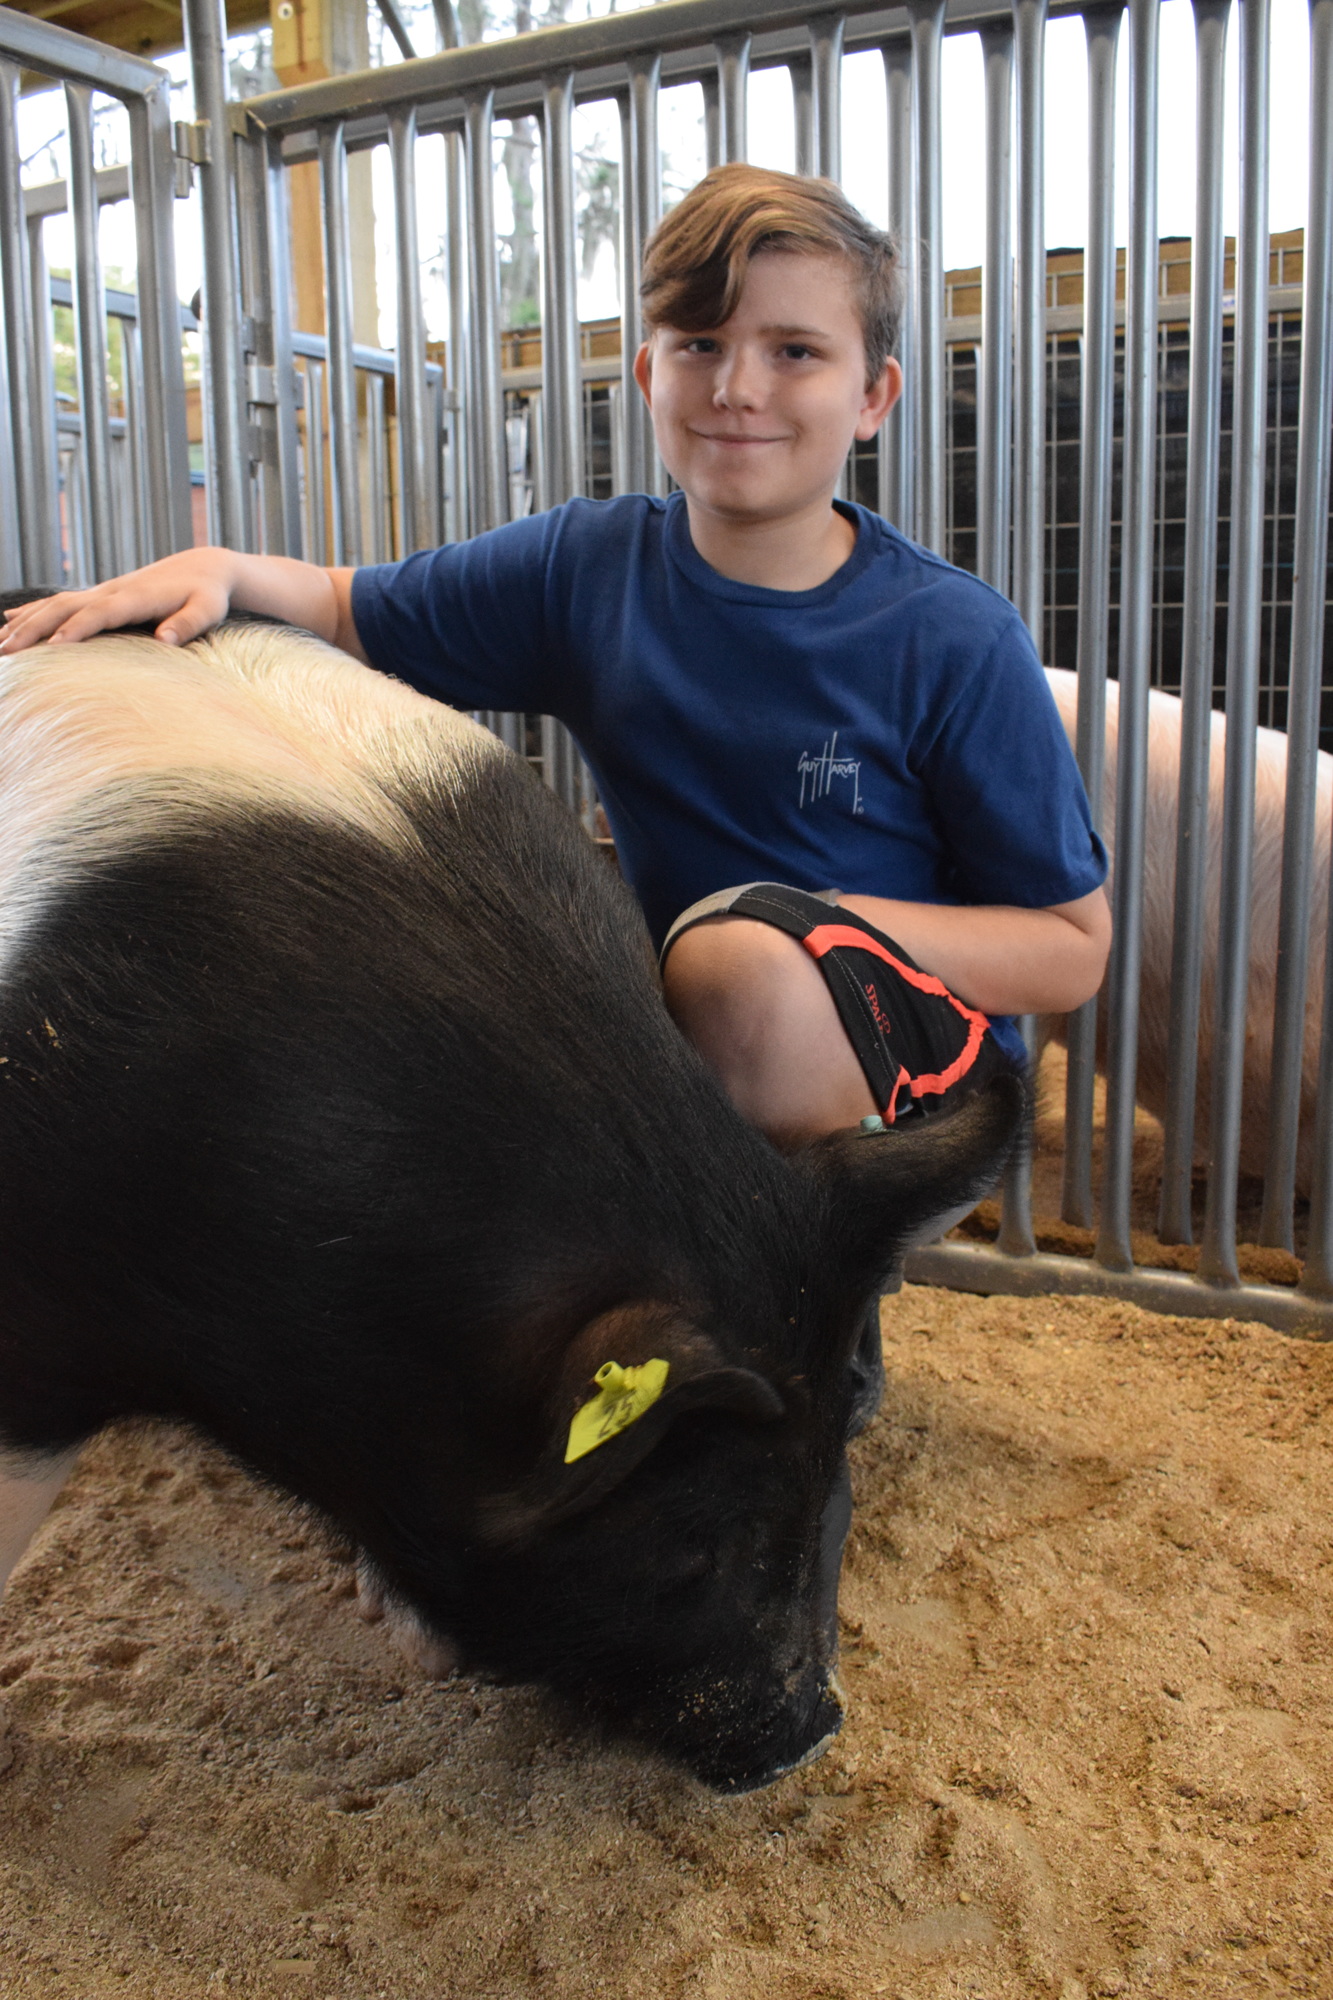 Bryson Ruth, a fifth grader, is charged with showing Myakka City Elementary School's 4-H chapter pig, Wilbur.